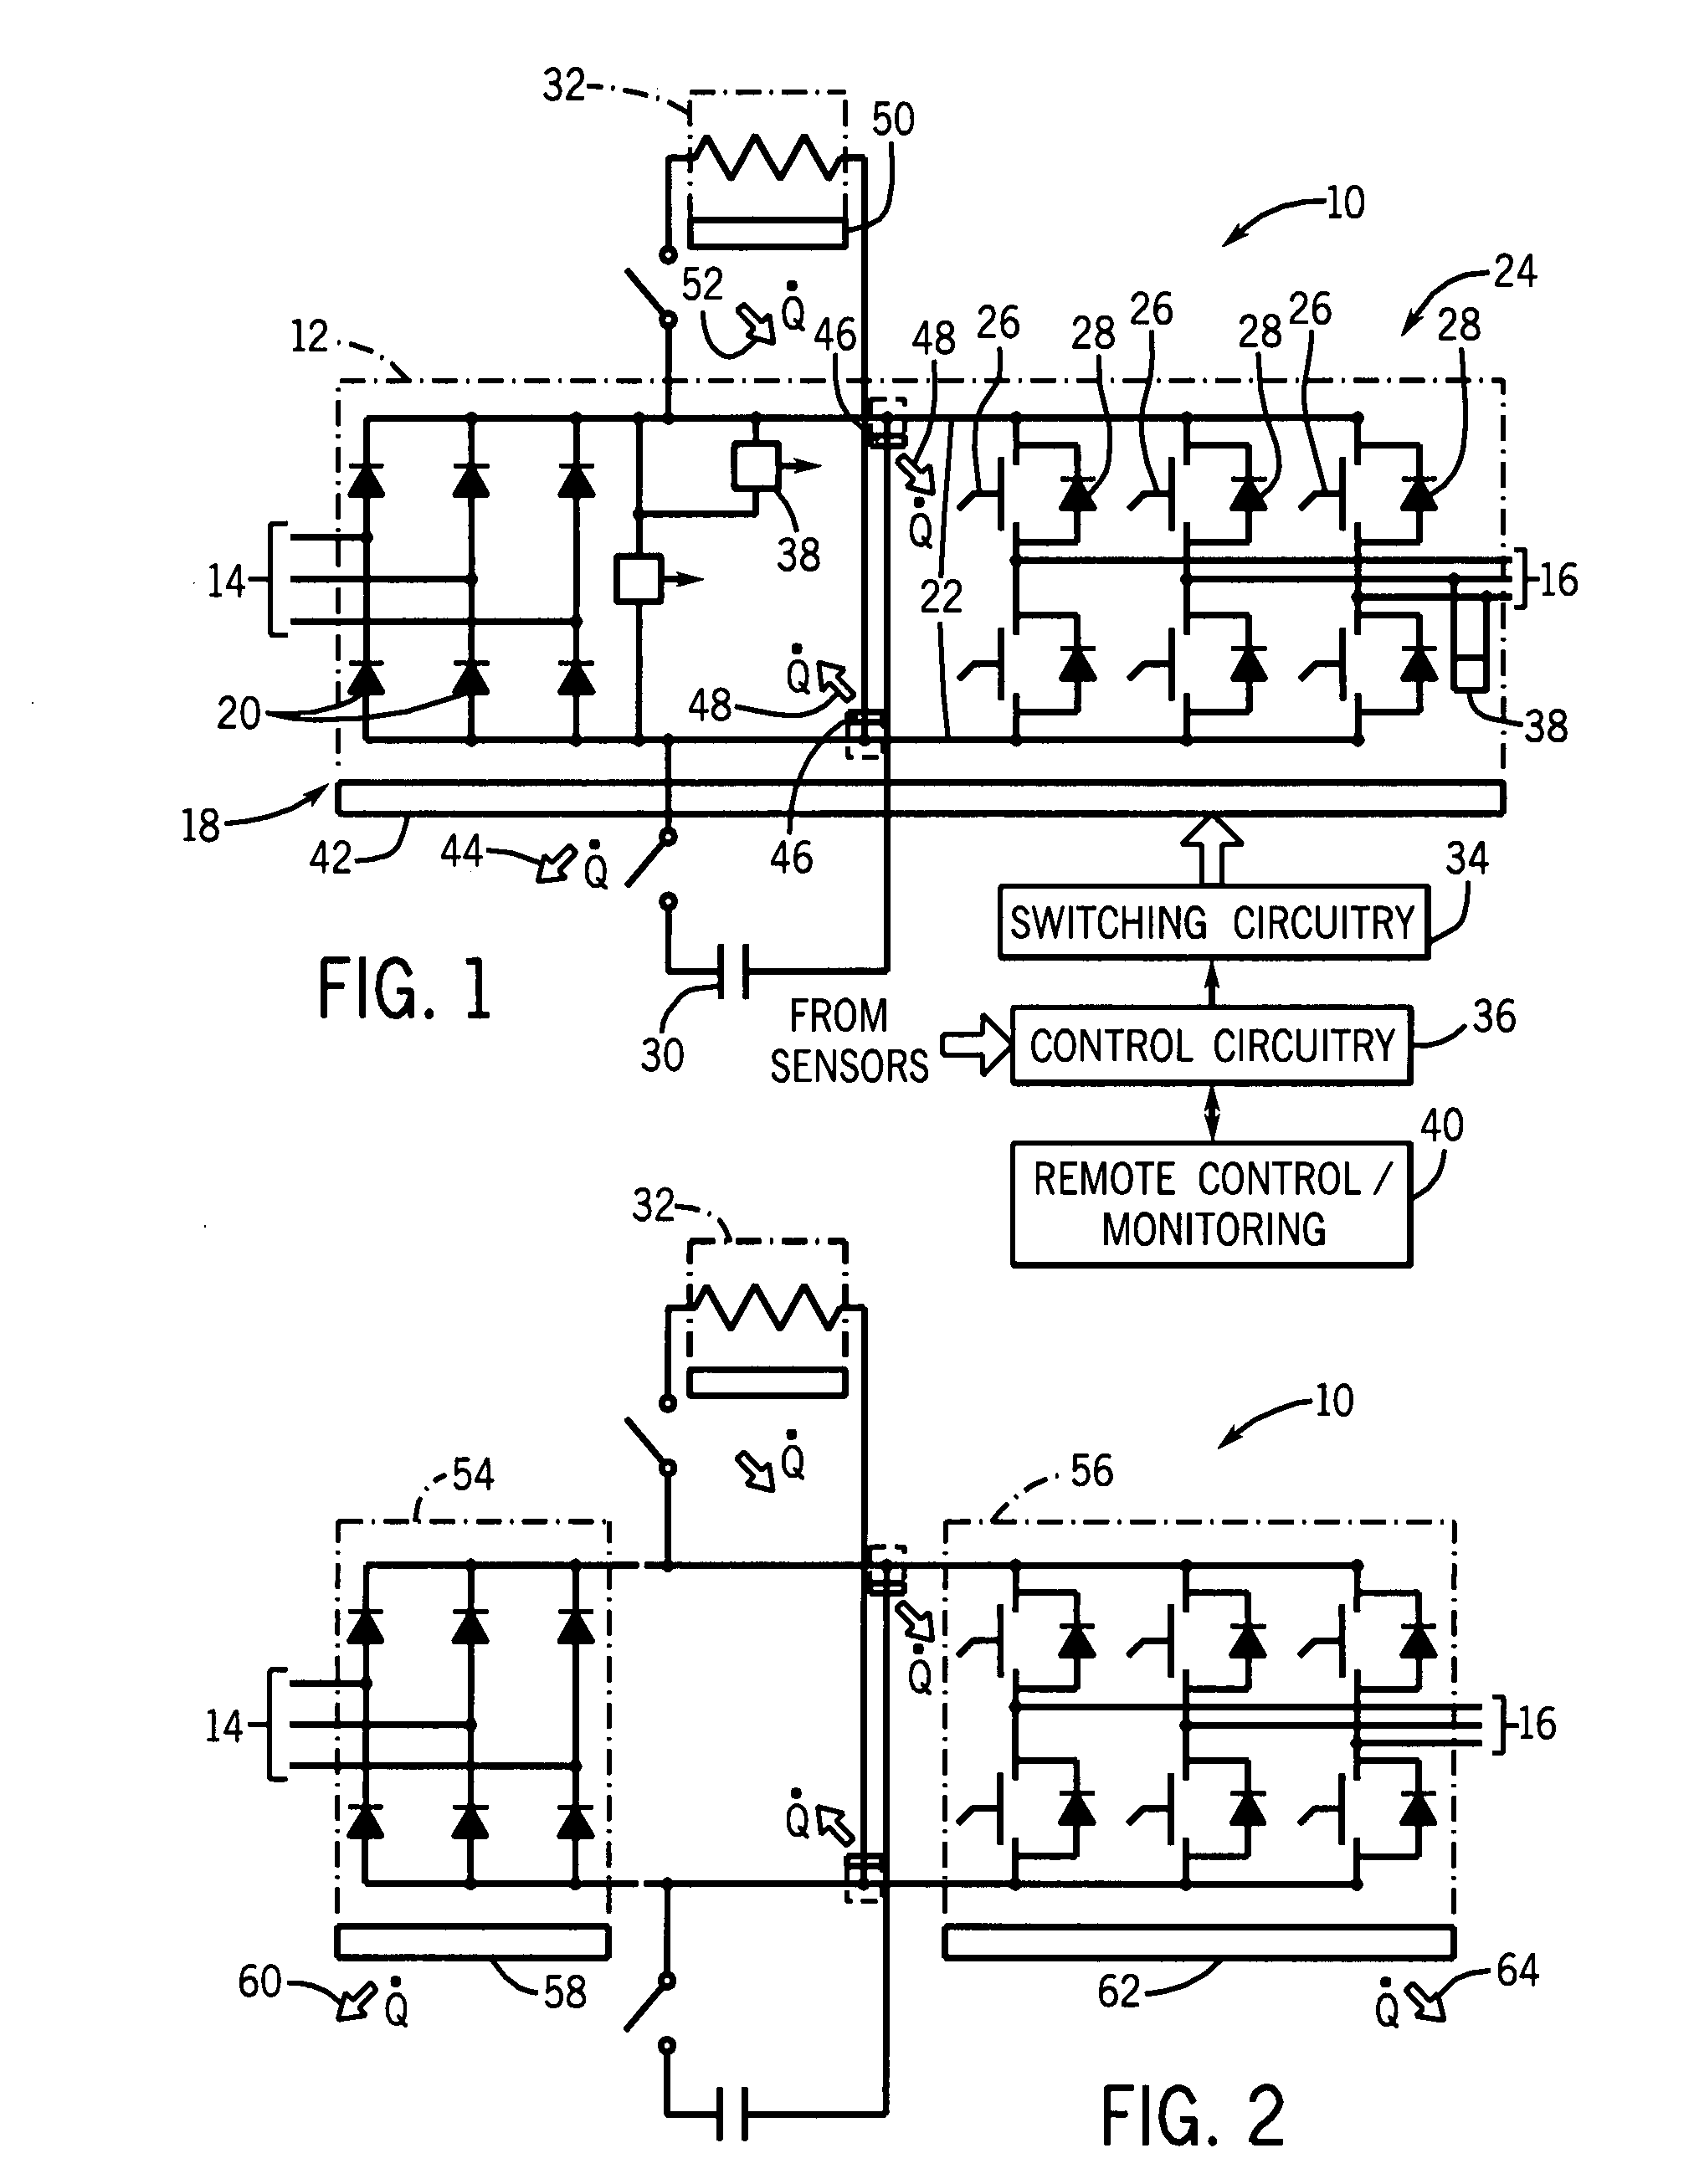 Phase change cooled electrical connections for power electronic devices